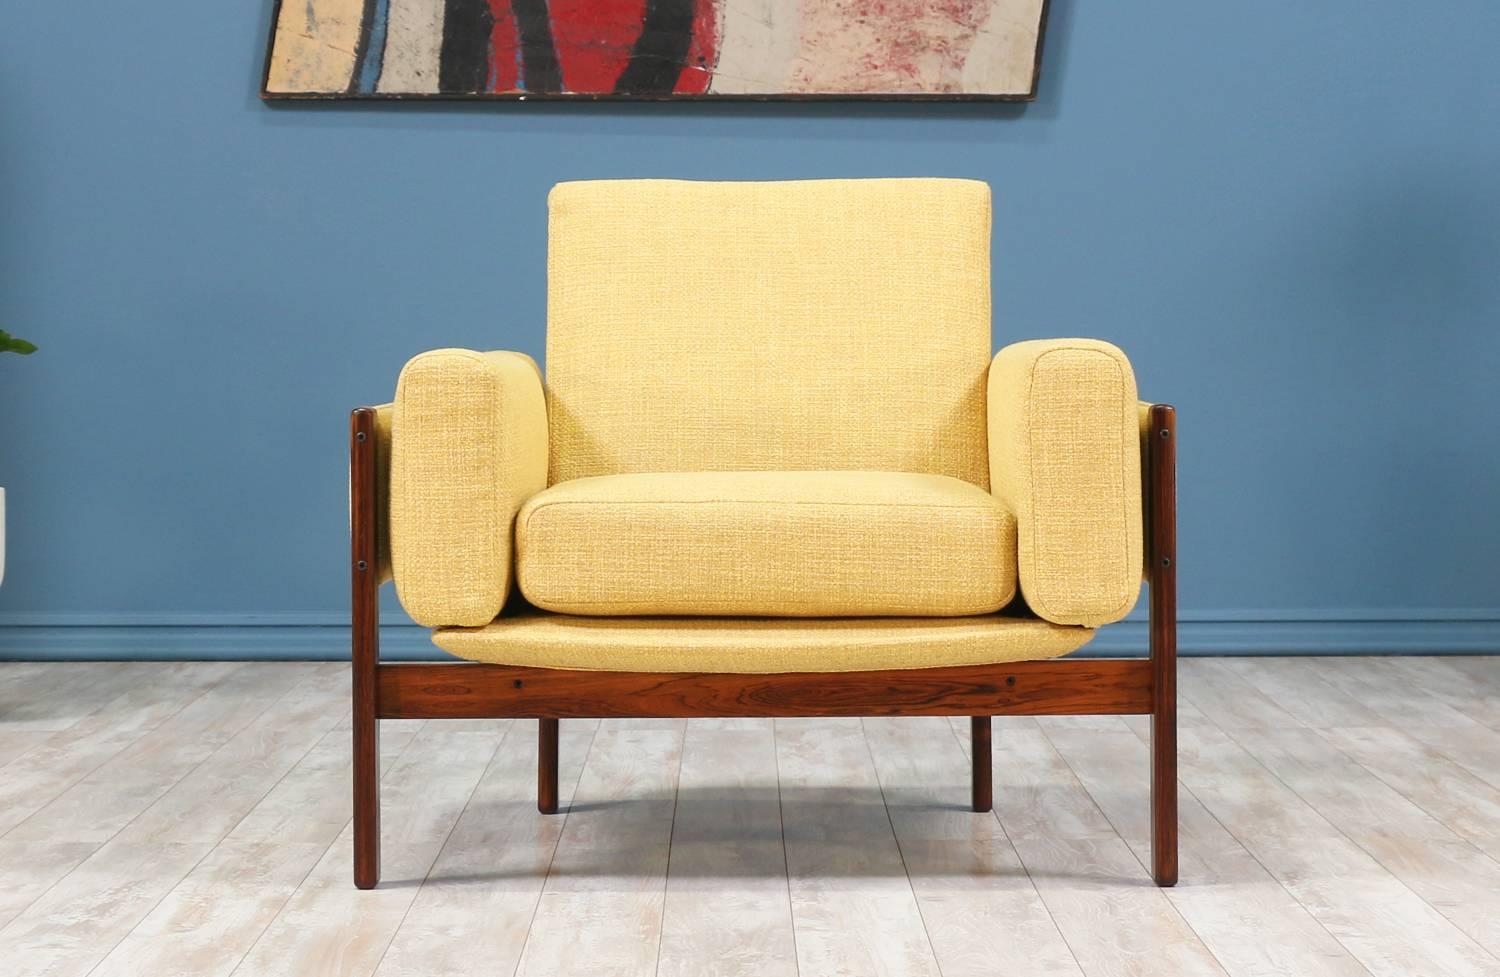 Easy chair designed by Sven Ivar Dysthe for Dokka Møbler in Norway circa 1960’s. The “Flueline” design features a Brazilian rosewood frame and a new cotton blend fabric upholstery in a beautiful creamy tone that contrasts with the dark rosewood